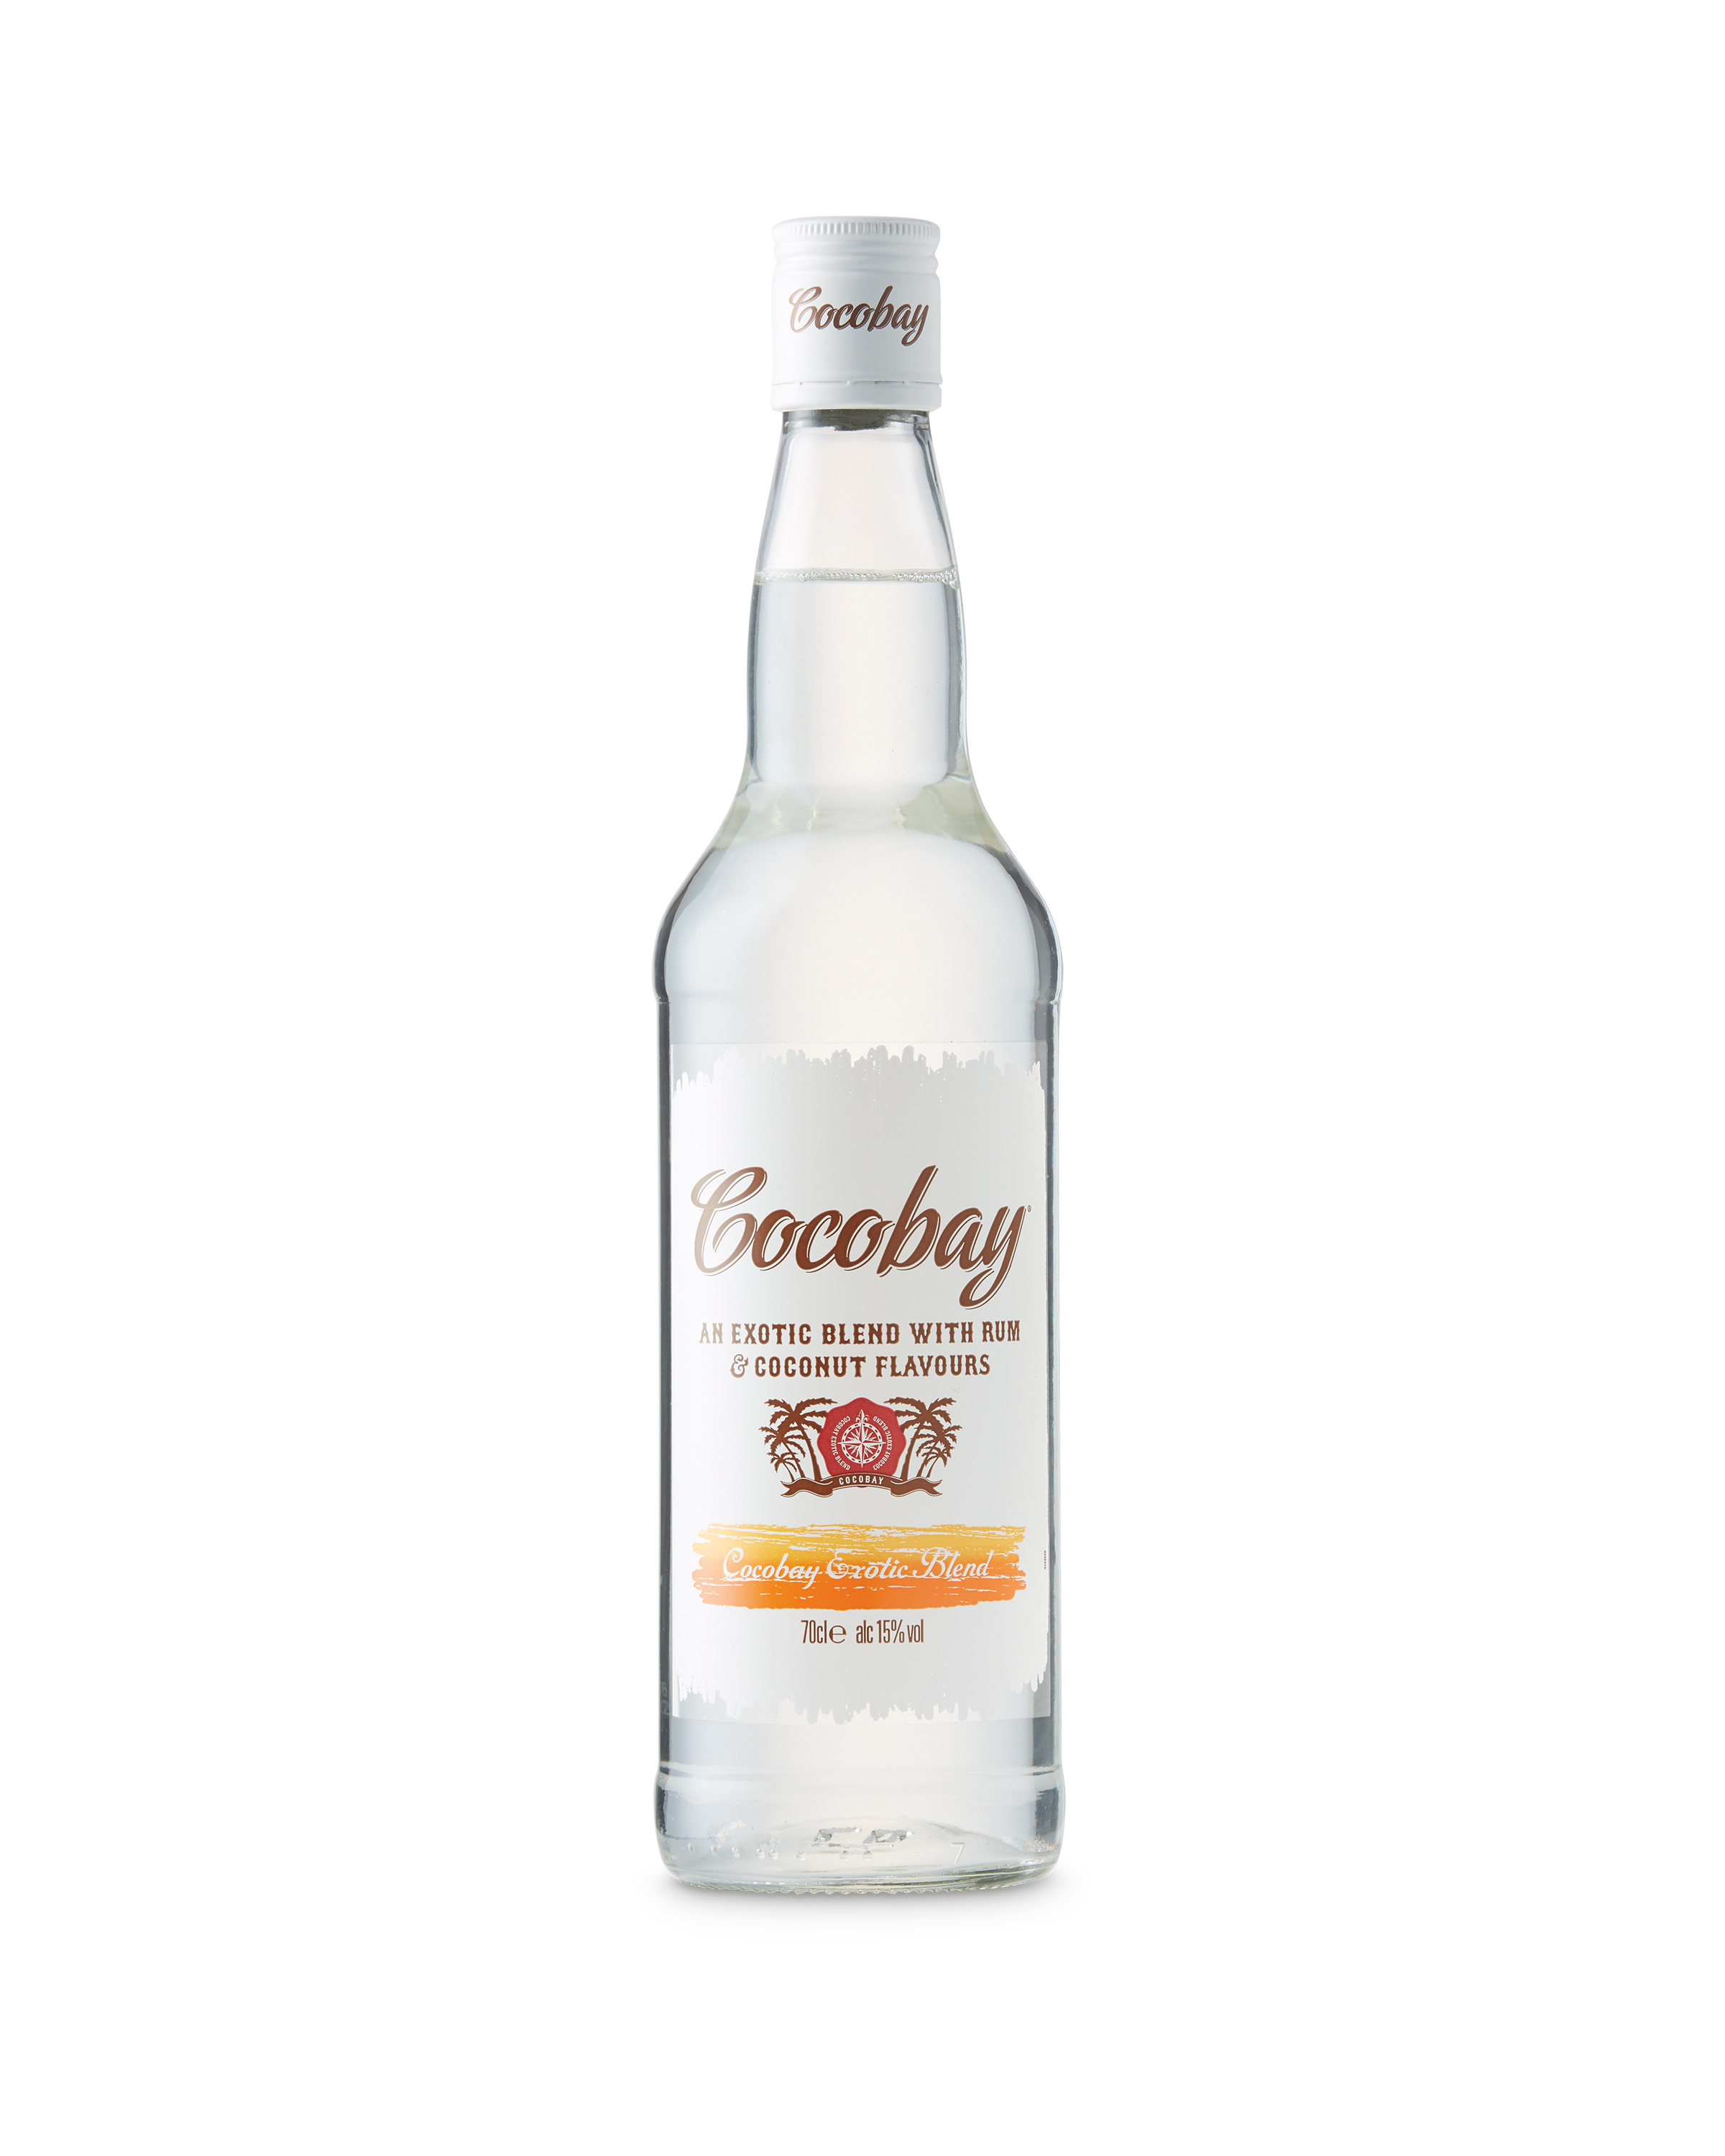 how many calories in a bottle of malibu coconut rum